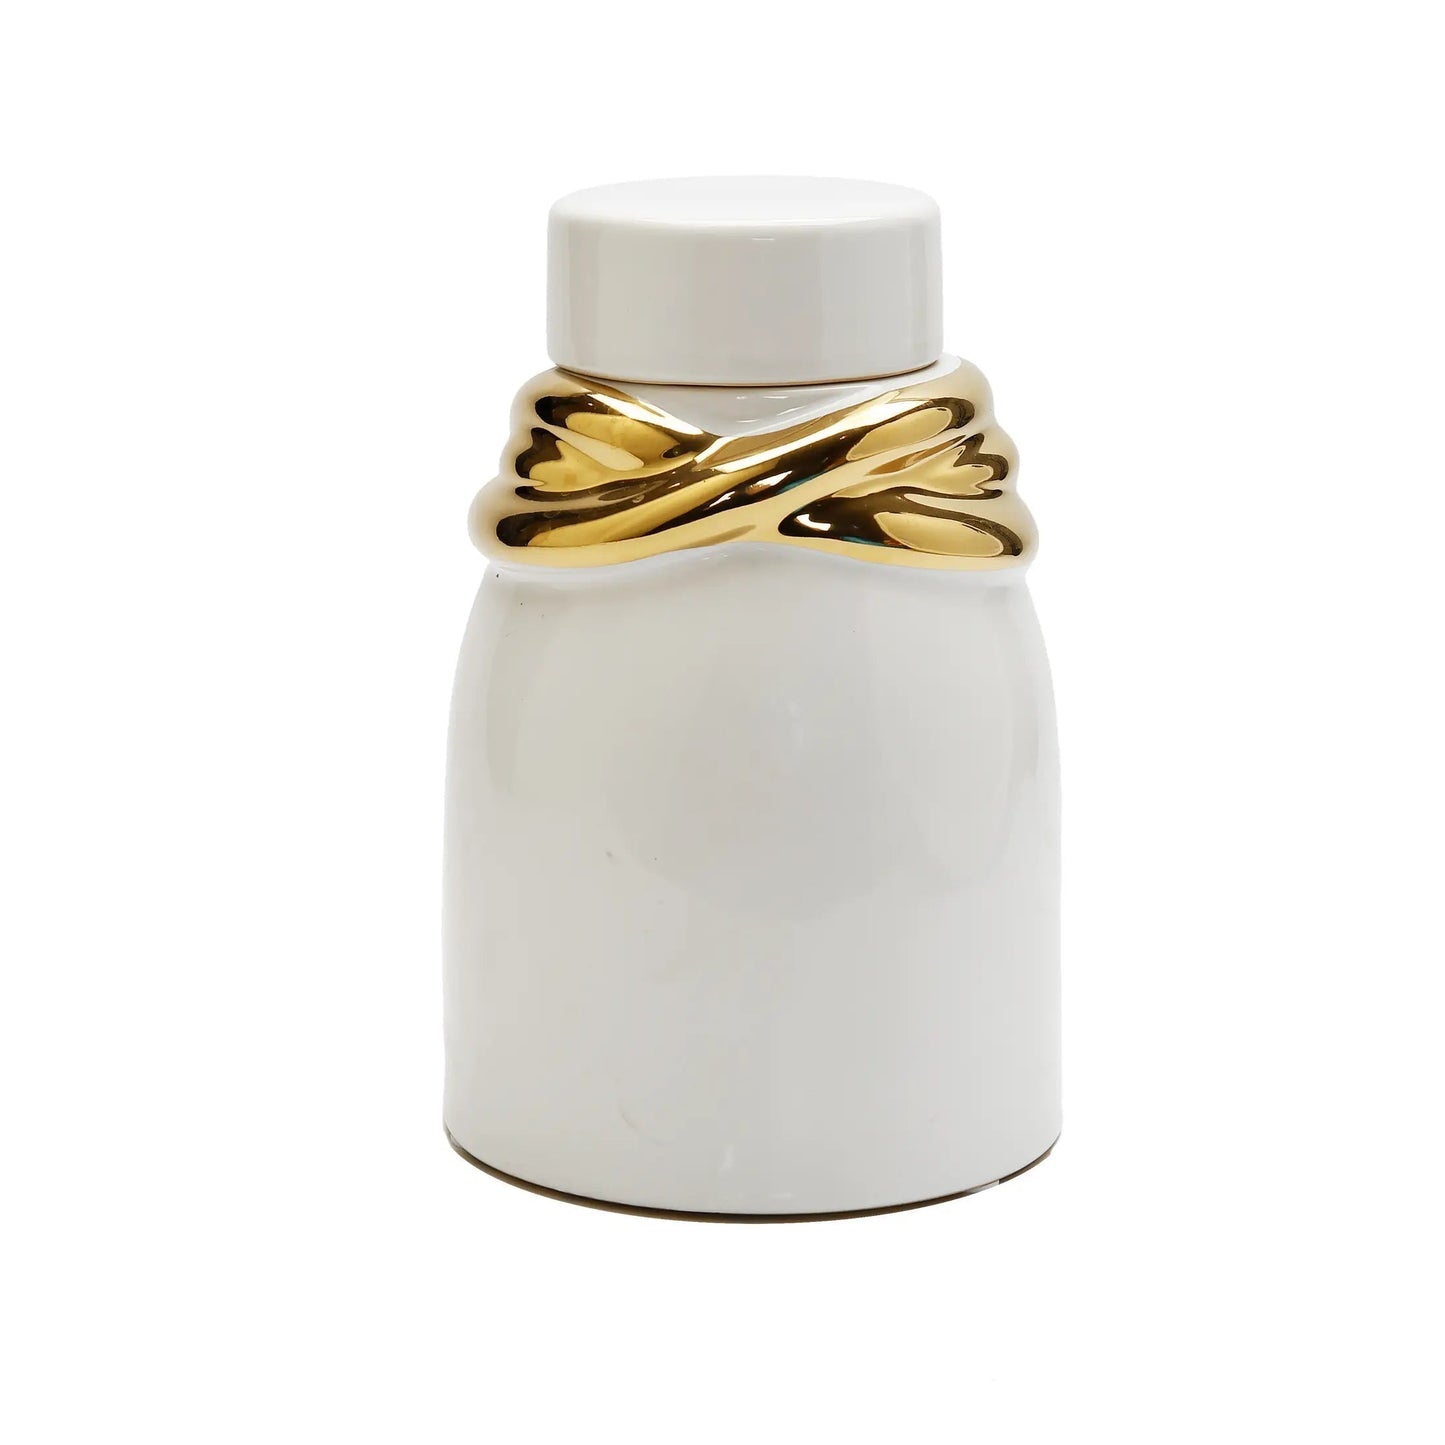 White Ceramic Jar with Lid and Gold Details Decorative Jars High Class Touch - Home Decor 